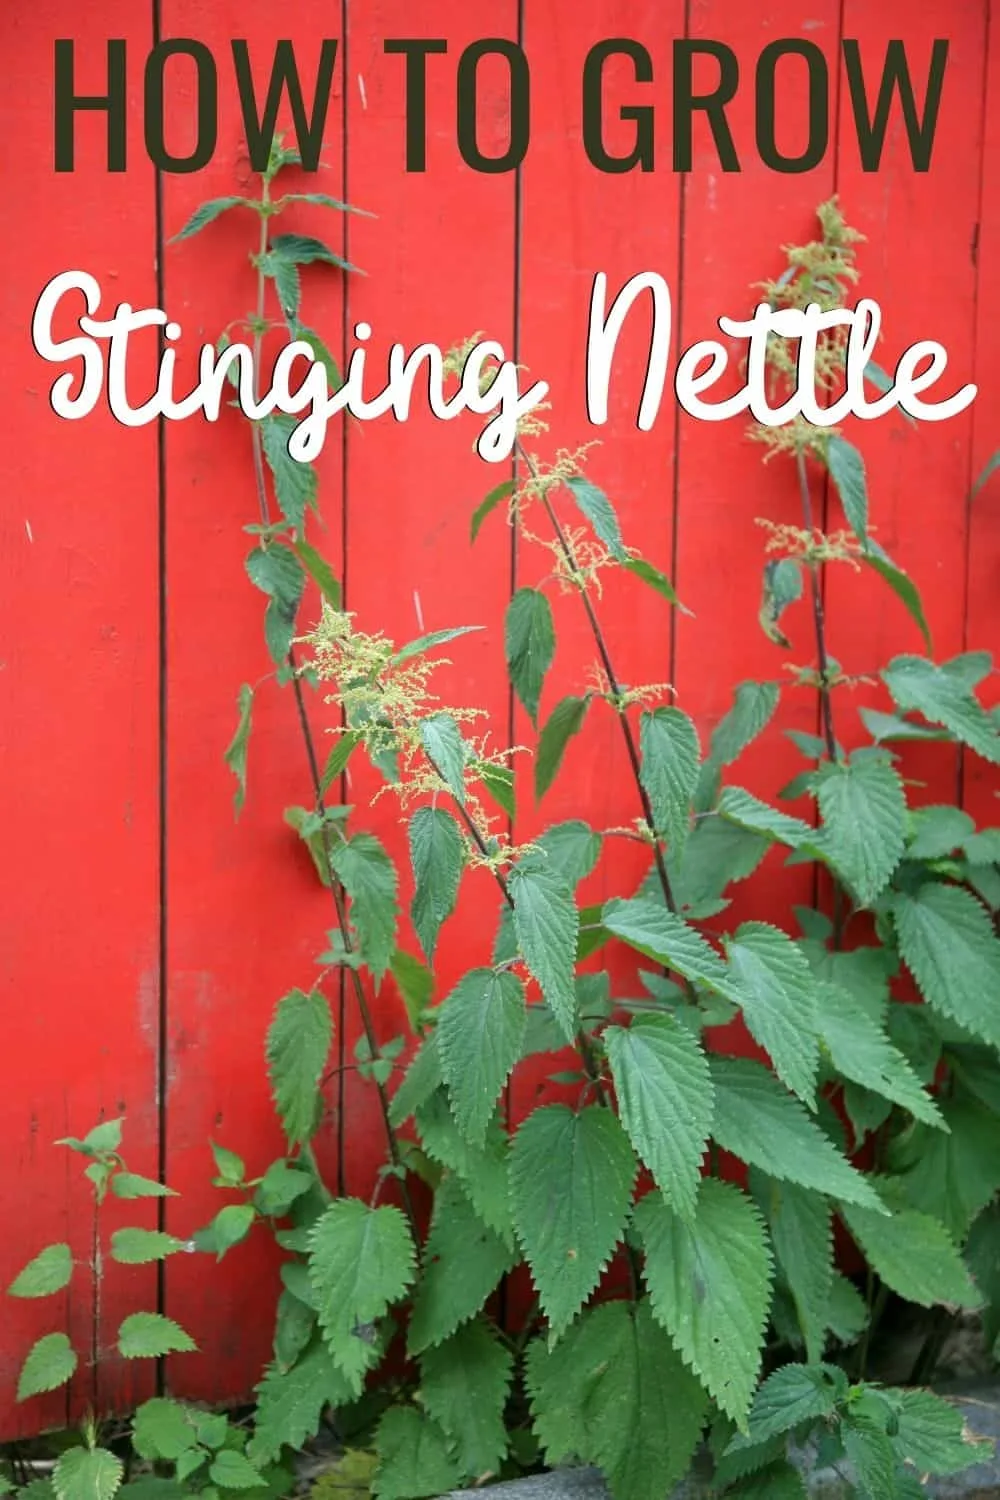 How to grow stinging nettle